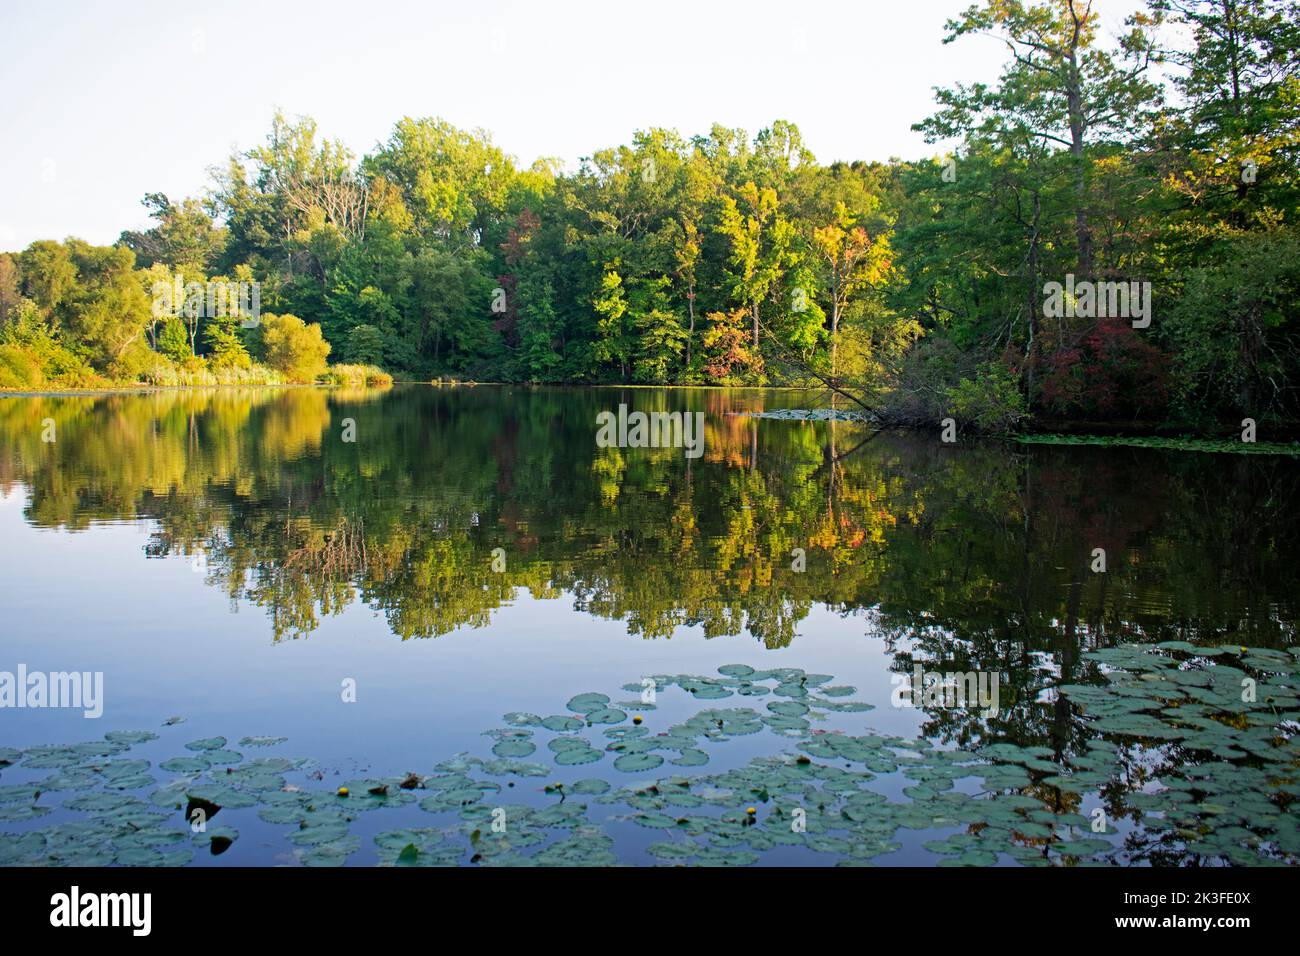 Reflections of trees and leaves in lake at Davidson's Mill Pond Park on a bright sunny day -14 Stock Photo